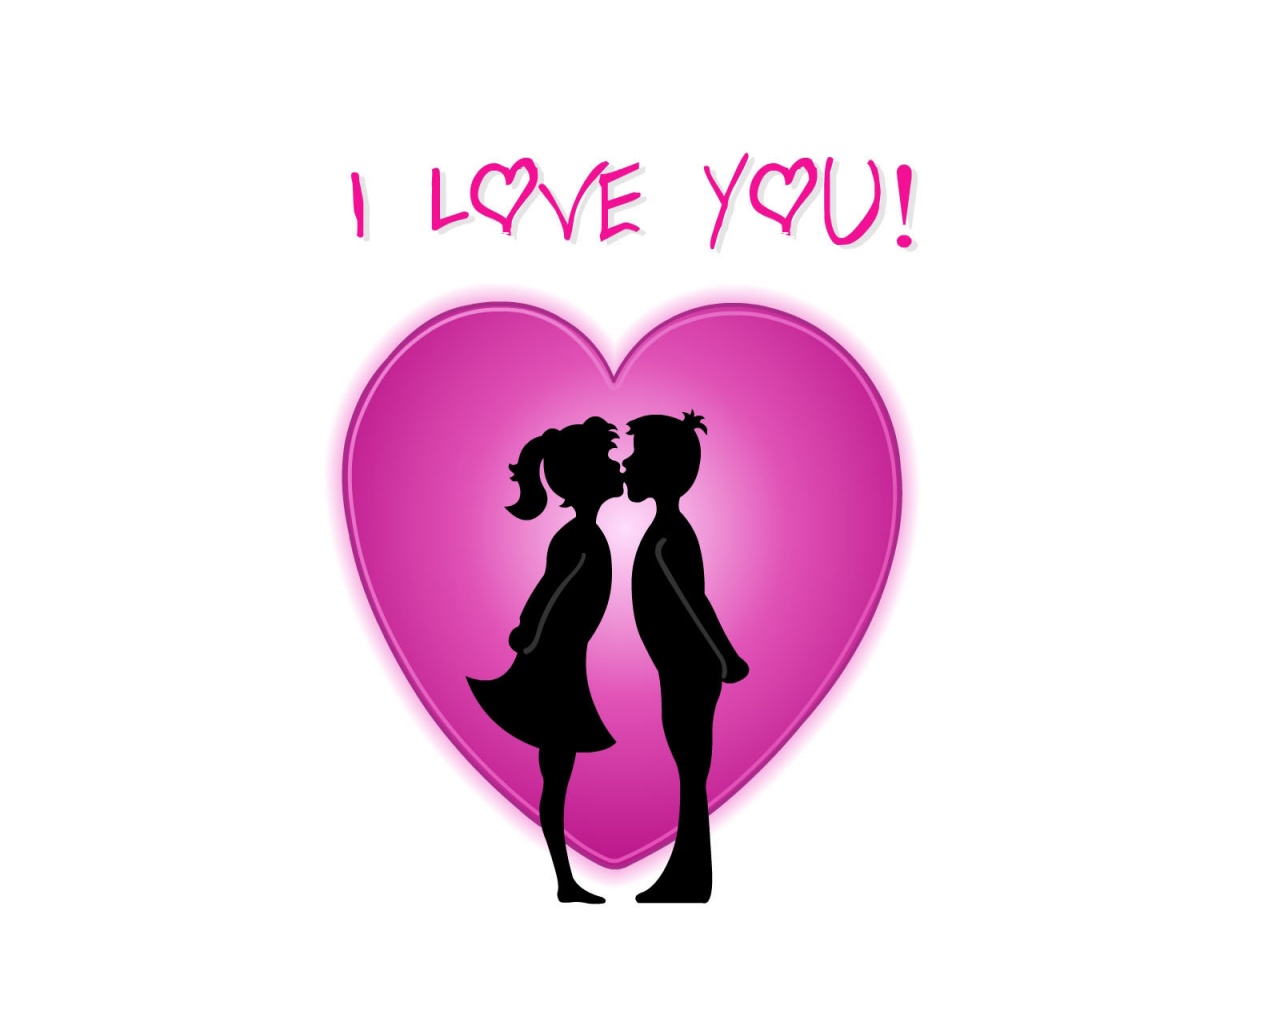 I Love You 3 Wallpapers in jpg format for free download